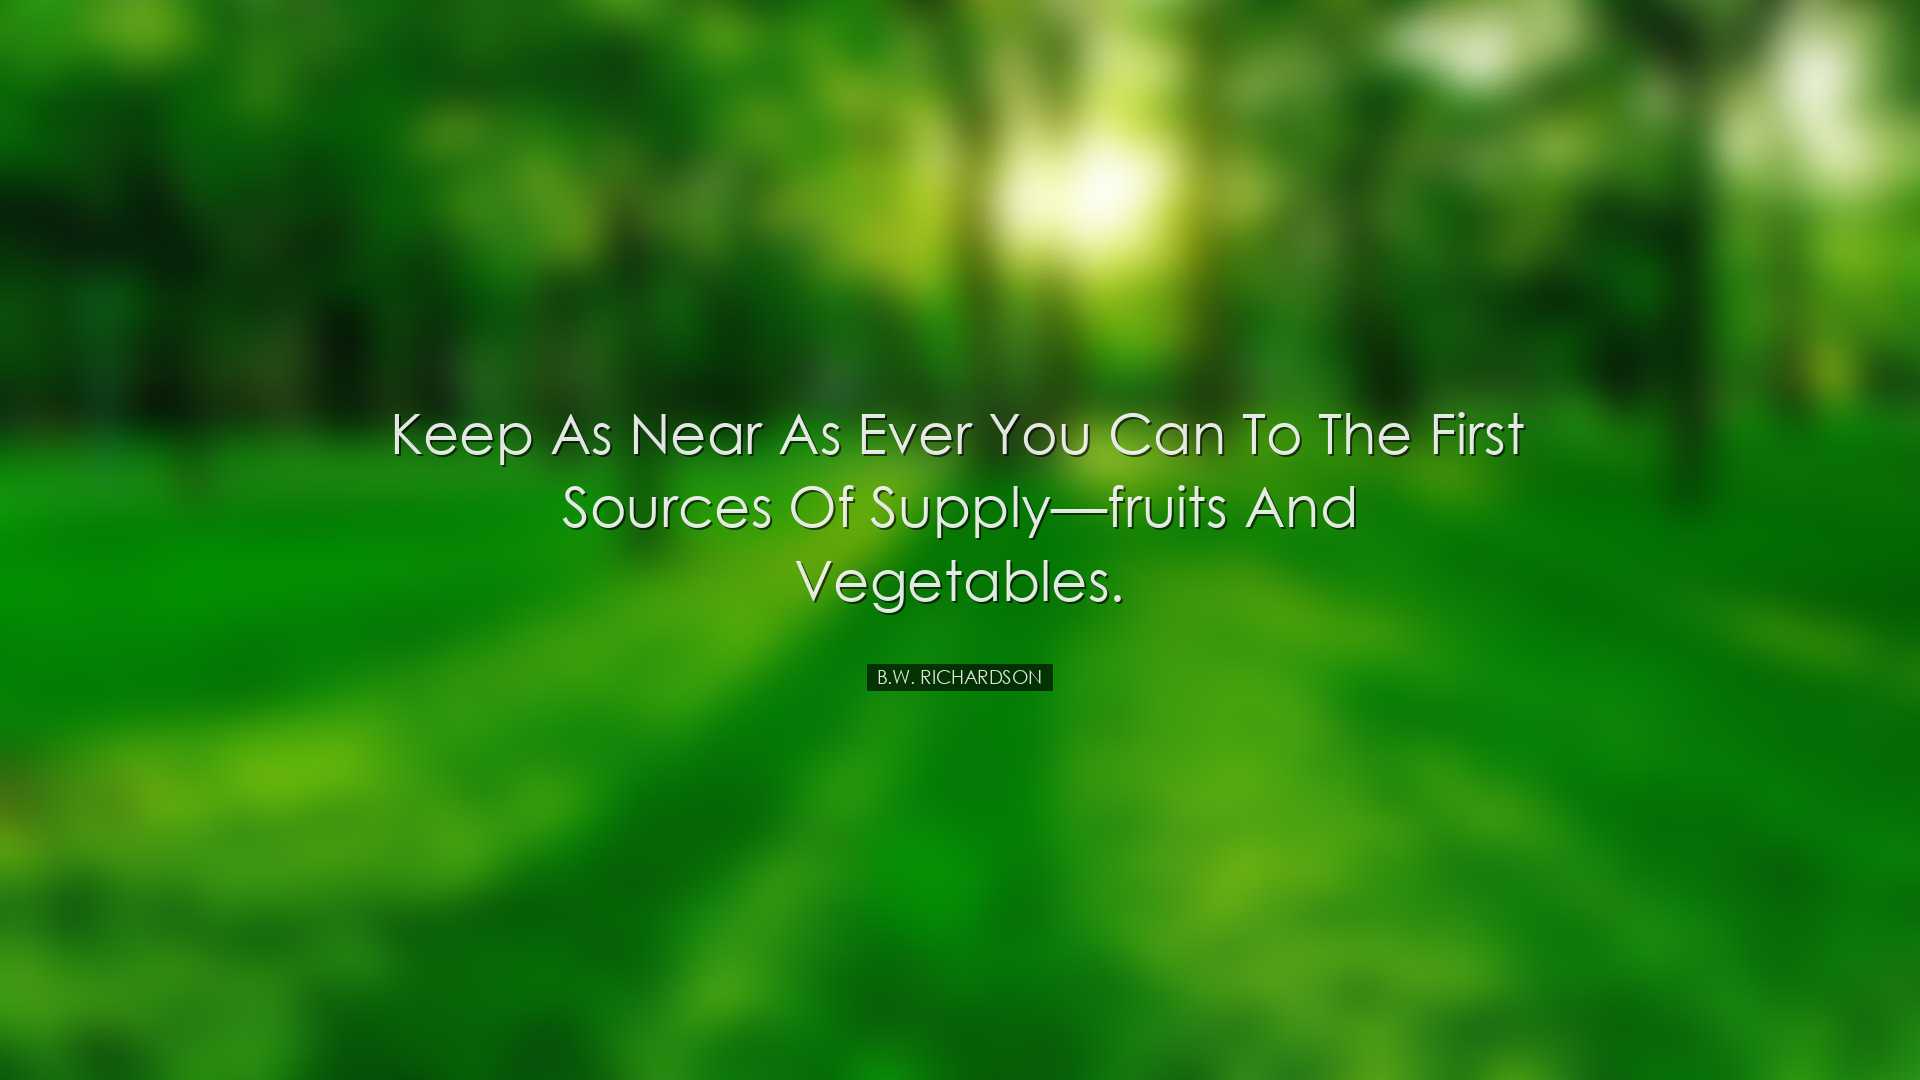 Keep as near as ever you can to the first sources of supply—